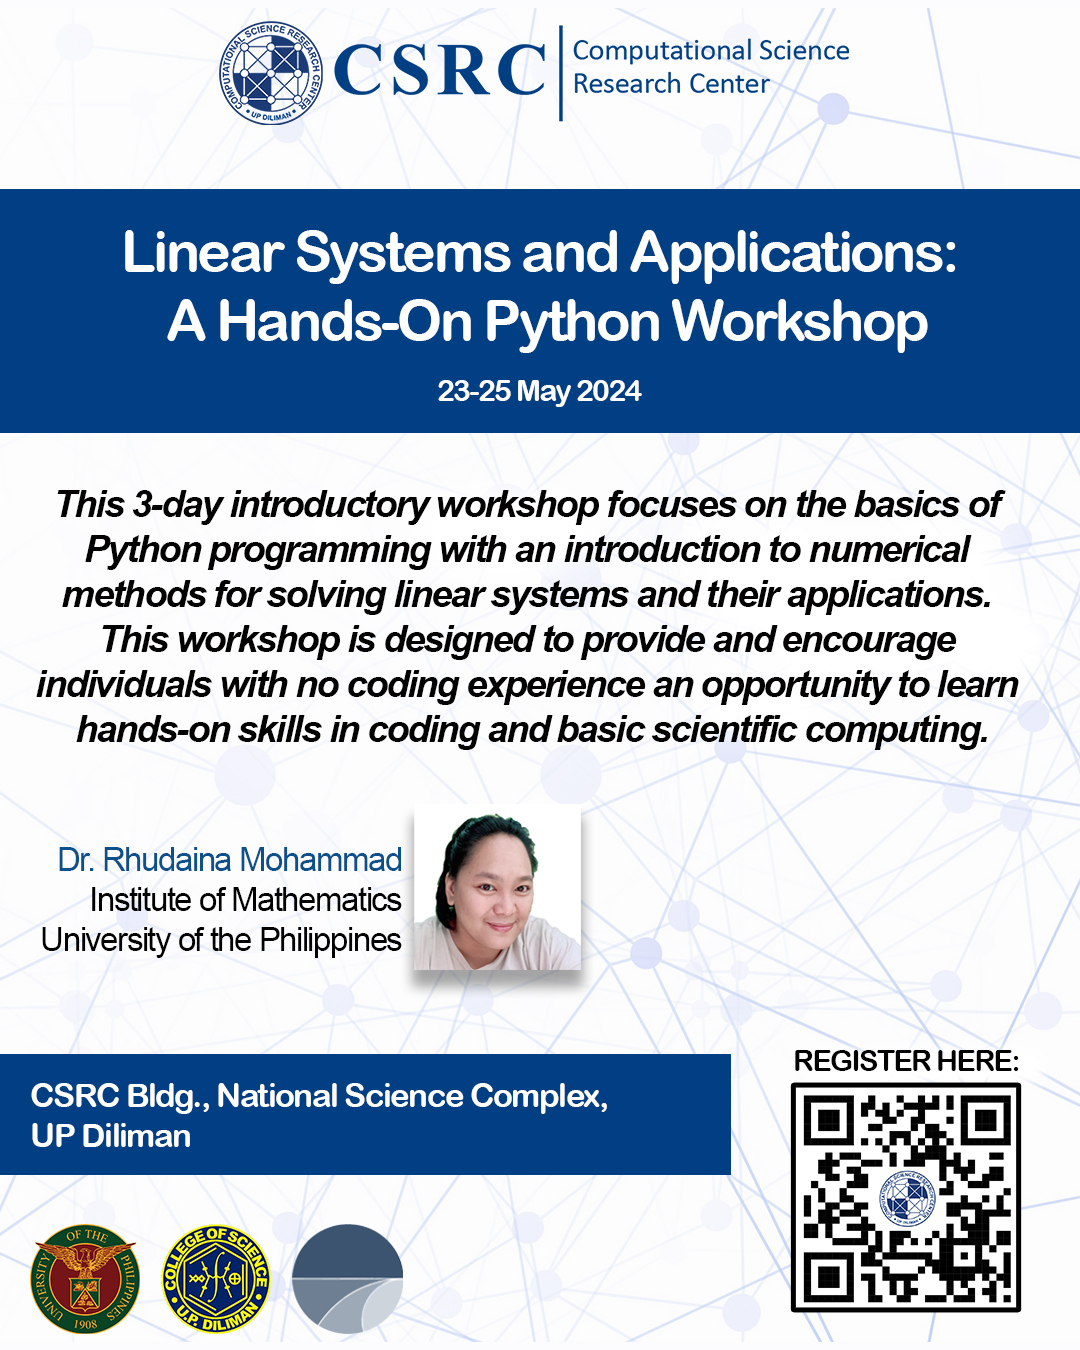 Linear Systems and Applications: A Hands-on Python Workshop